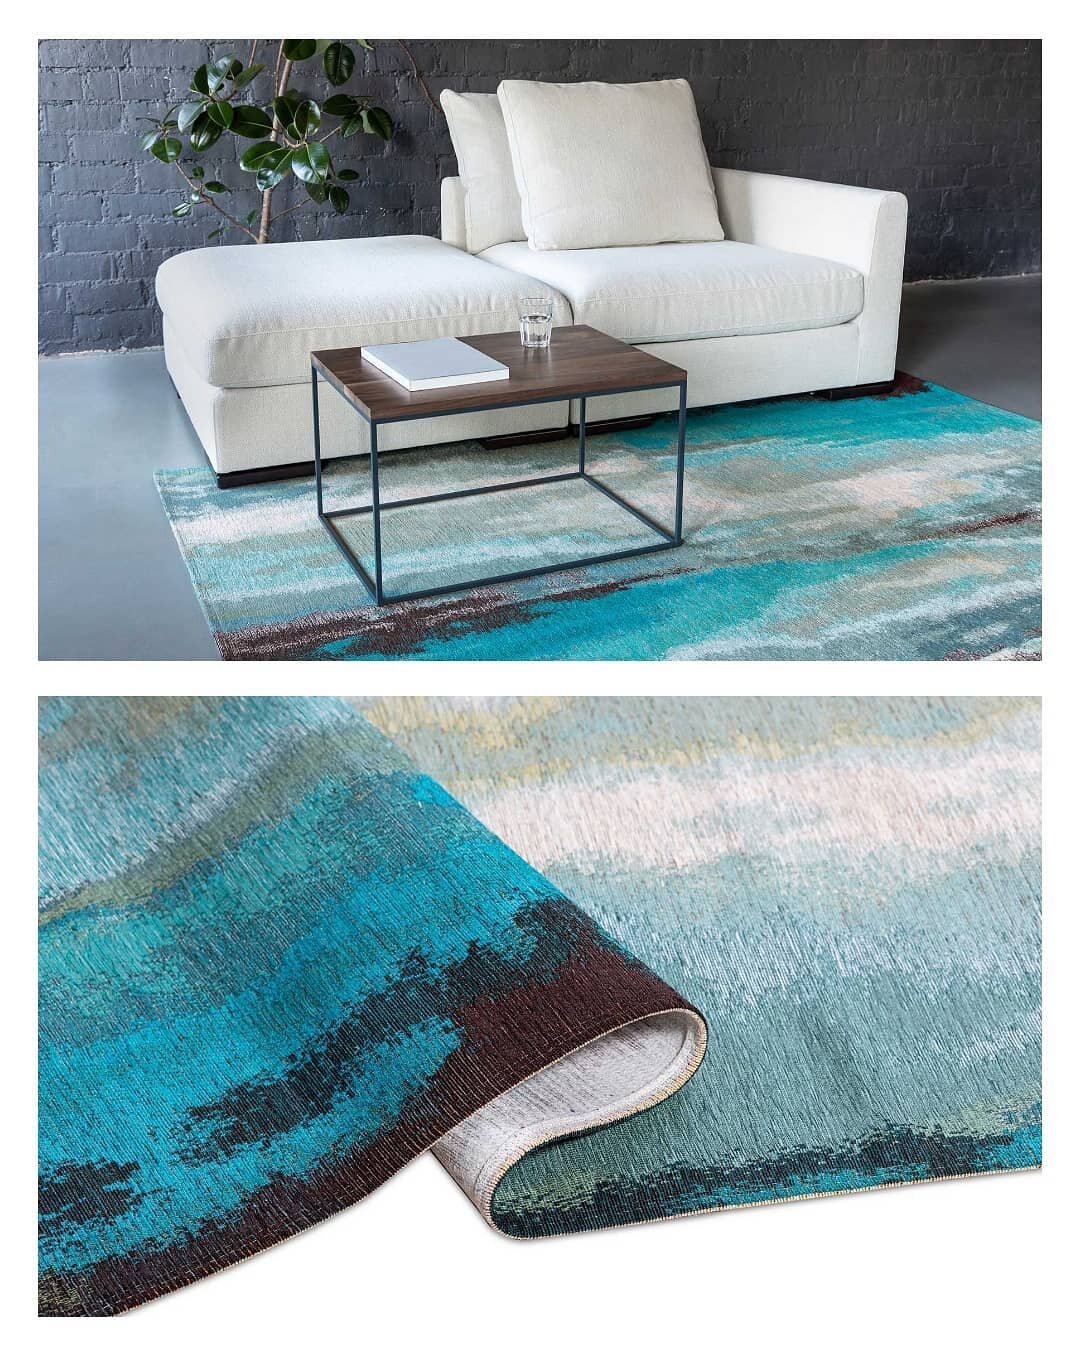 LAGUNA AQUA

160 x 230cm - &euro;438.80

Jacquard Flatweave
Cotton and polyester
Easy to clean
Non slip backing

Remember to use code RUGS20 at checkout for 20% off.

💚 💚 💚

#nordicstyle #scandistyle #floorart #handmaderugs #nordichome #danishdesi